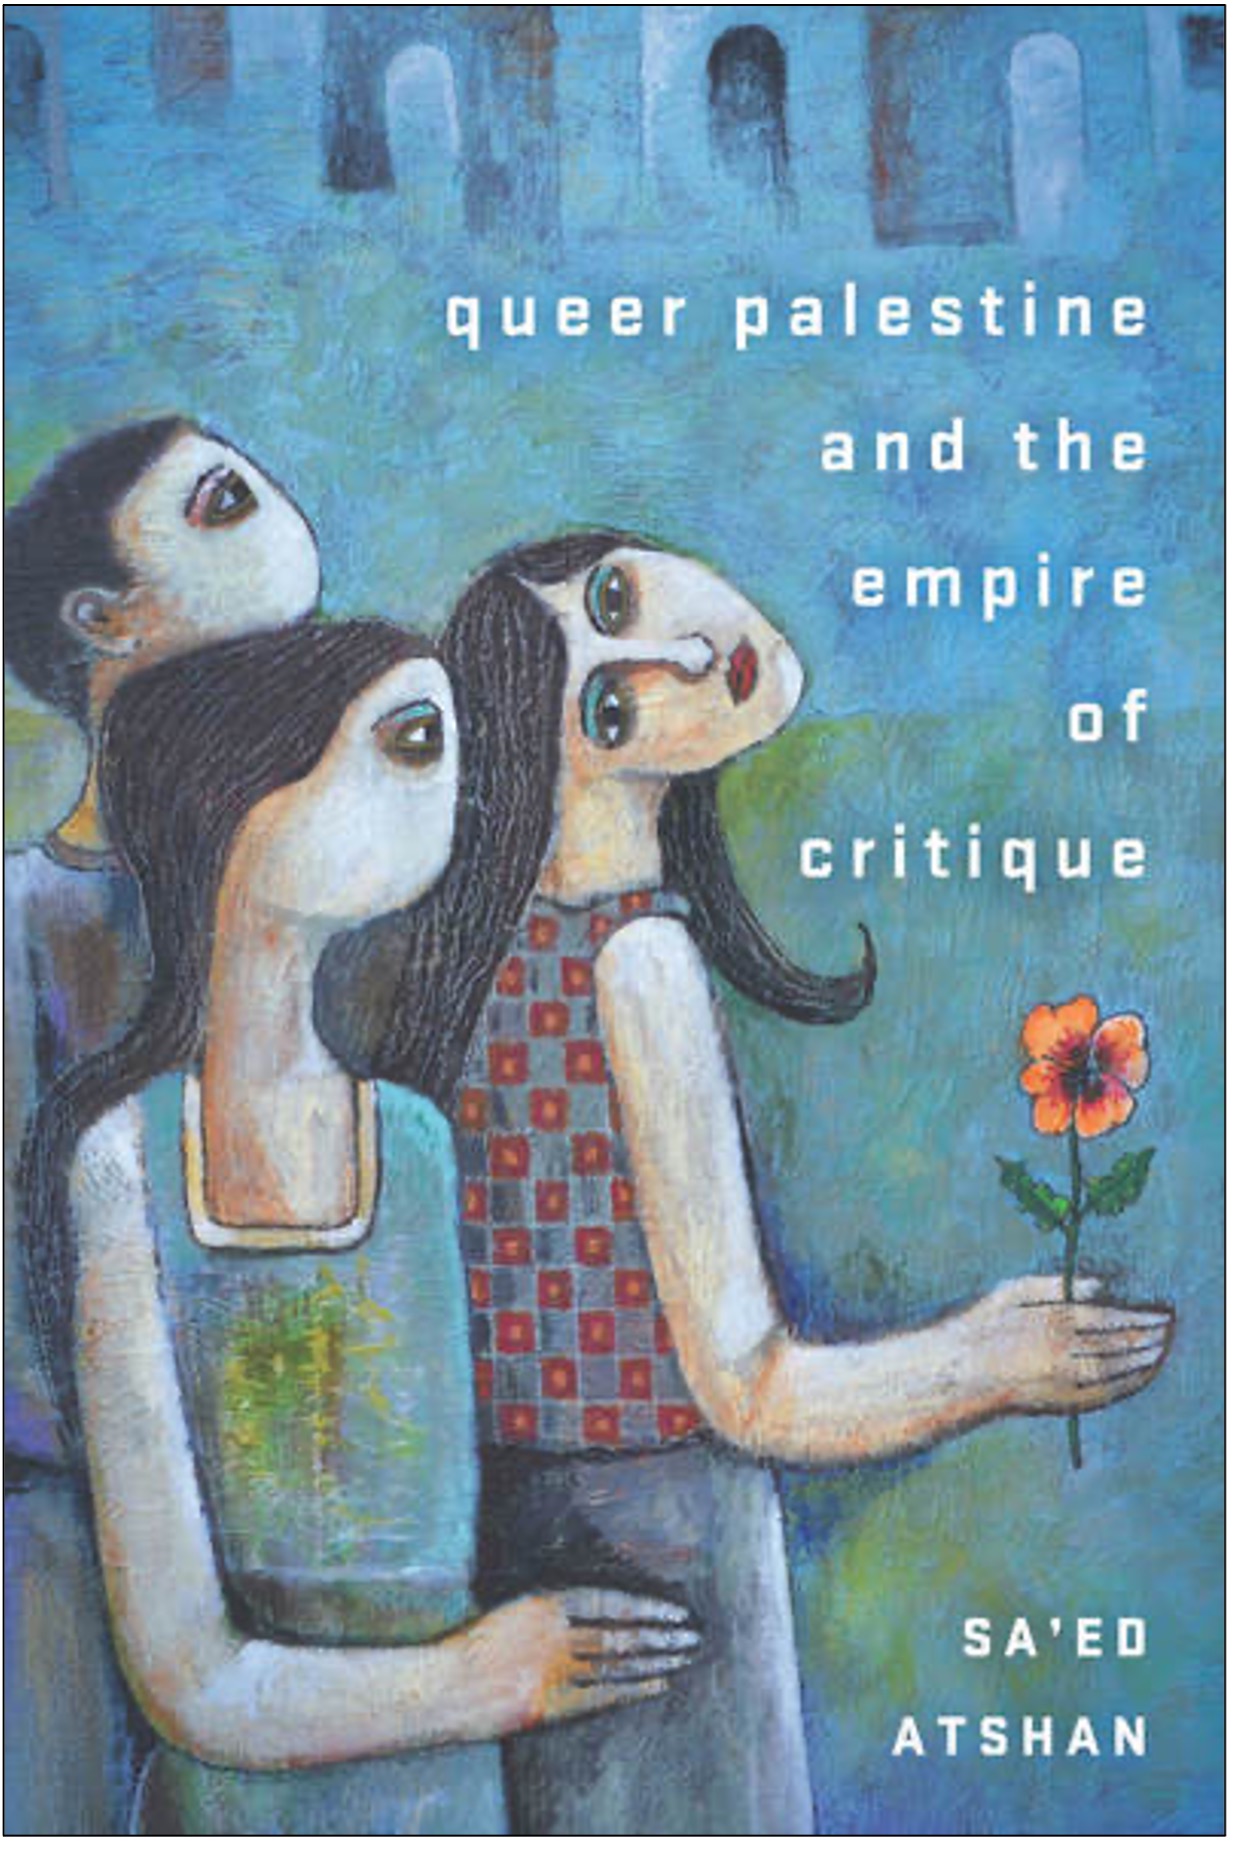 Sa’ed Atshan, Queer Palestine and the Empire of Critique